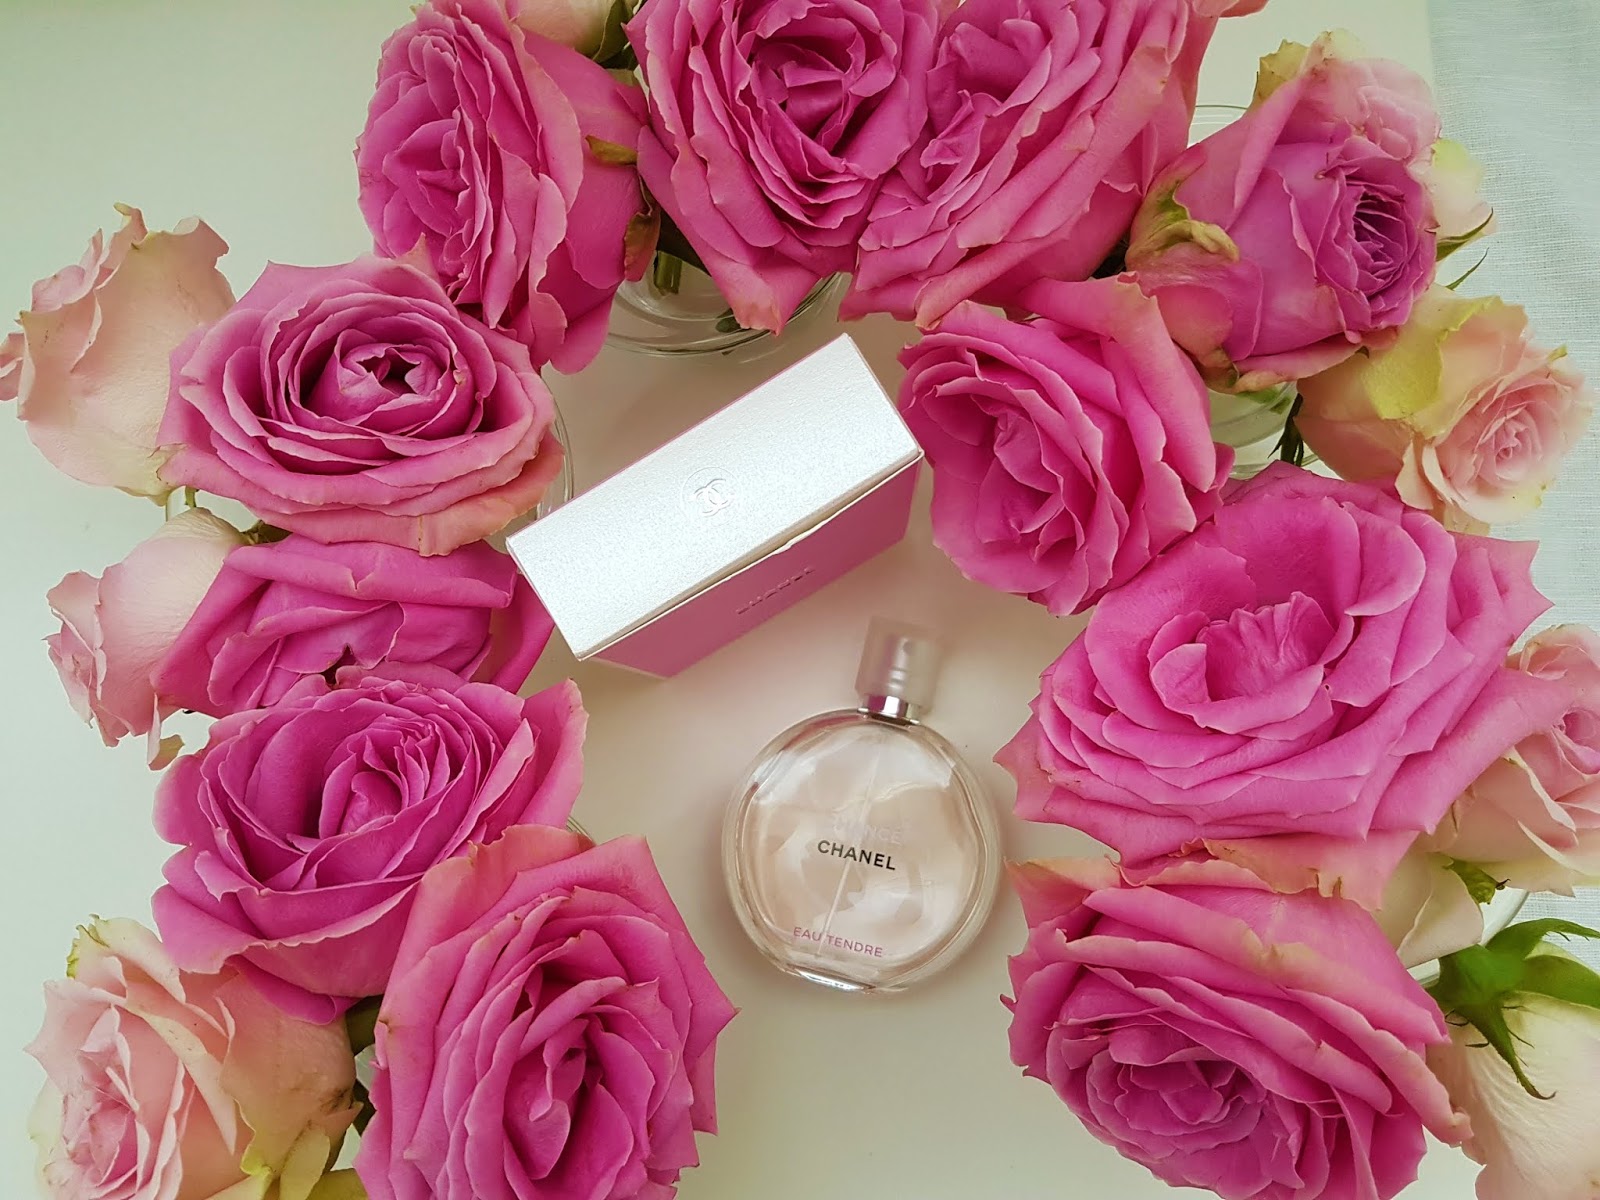 THE EXCLUSIVE BEAUTY DIARY : CHANEL CHANCE EAU TENDRE